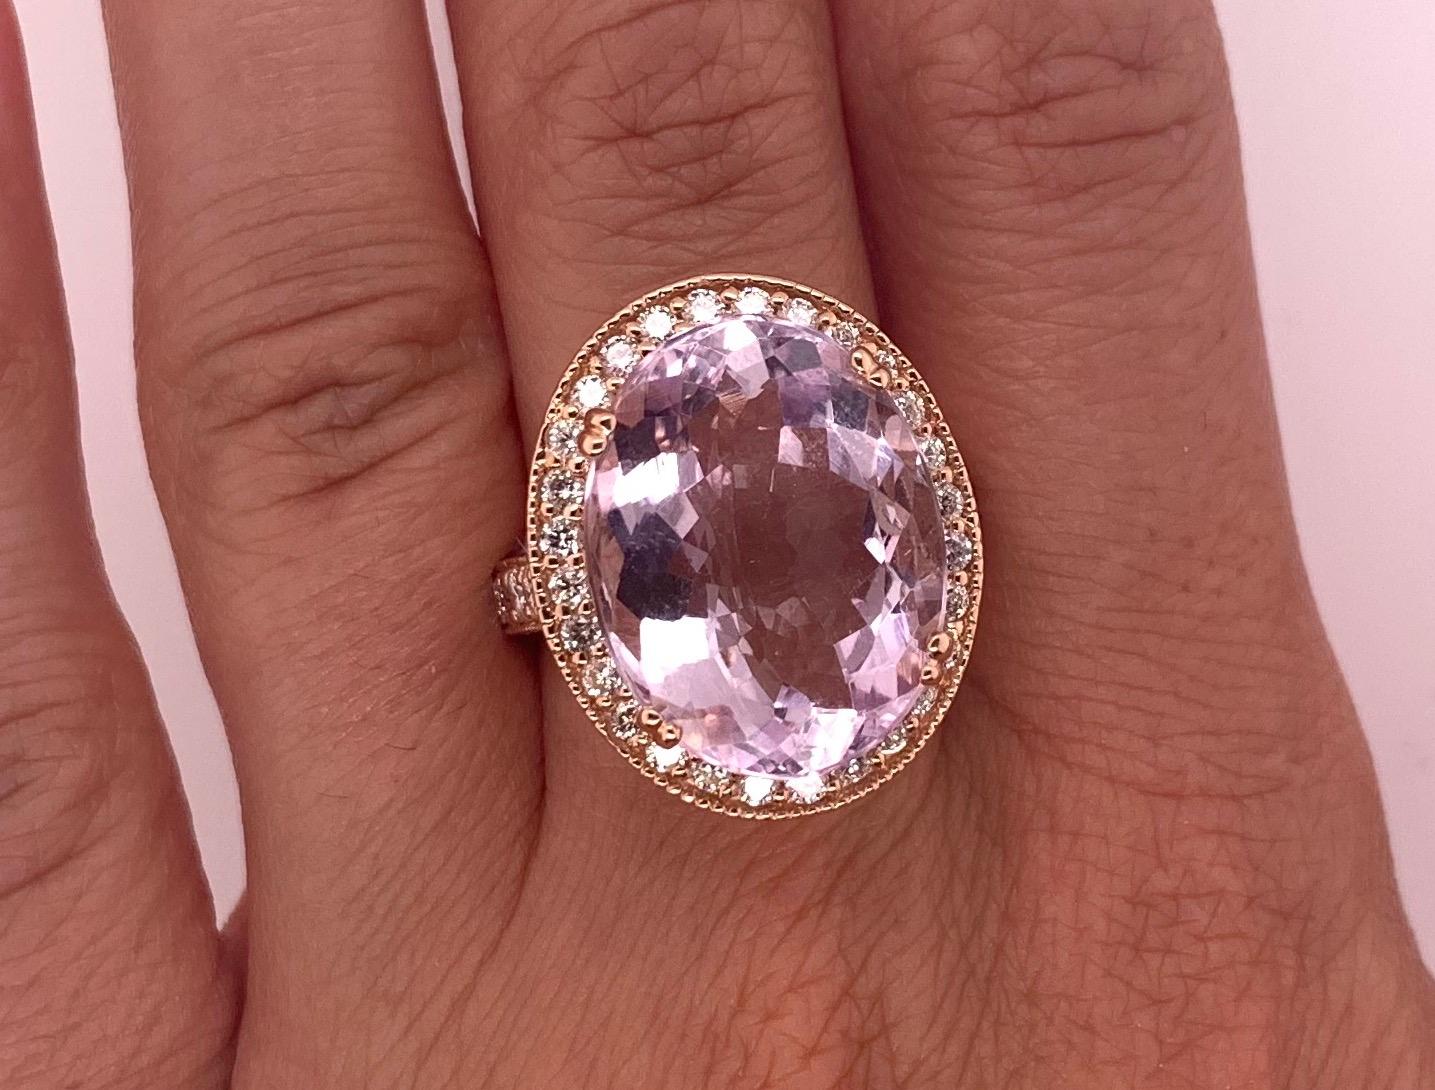 Material: 14k Rose Gold 
Center Stone Details: 1 Oval Shaped Kunzite at 12.53 Carats Total- Measuring 18 x 14 mm
Mounting Diamond Details: 34 Brilliant Round White Diamonds at 0.95 Carats - Clarity: SI / Color: H-I
Ring Size: Size 7 (can be